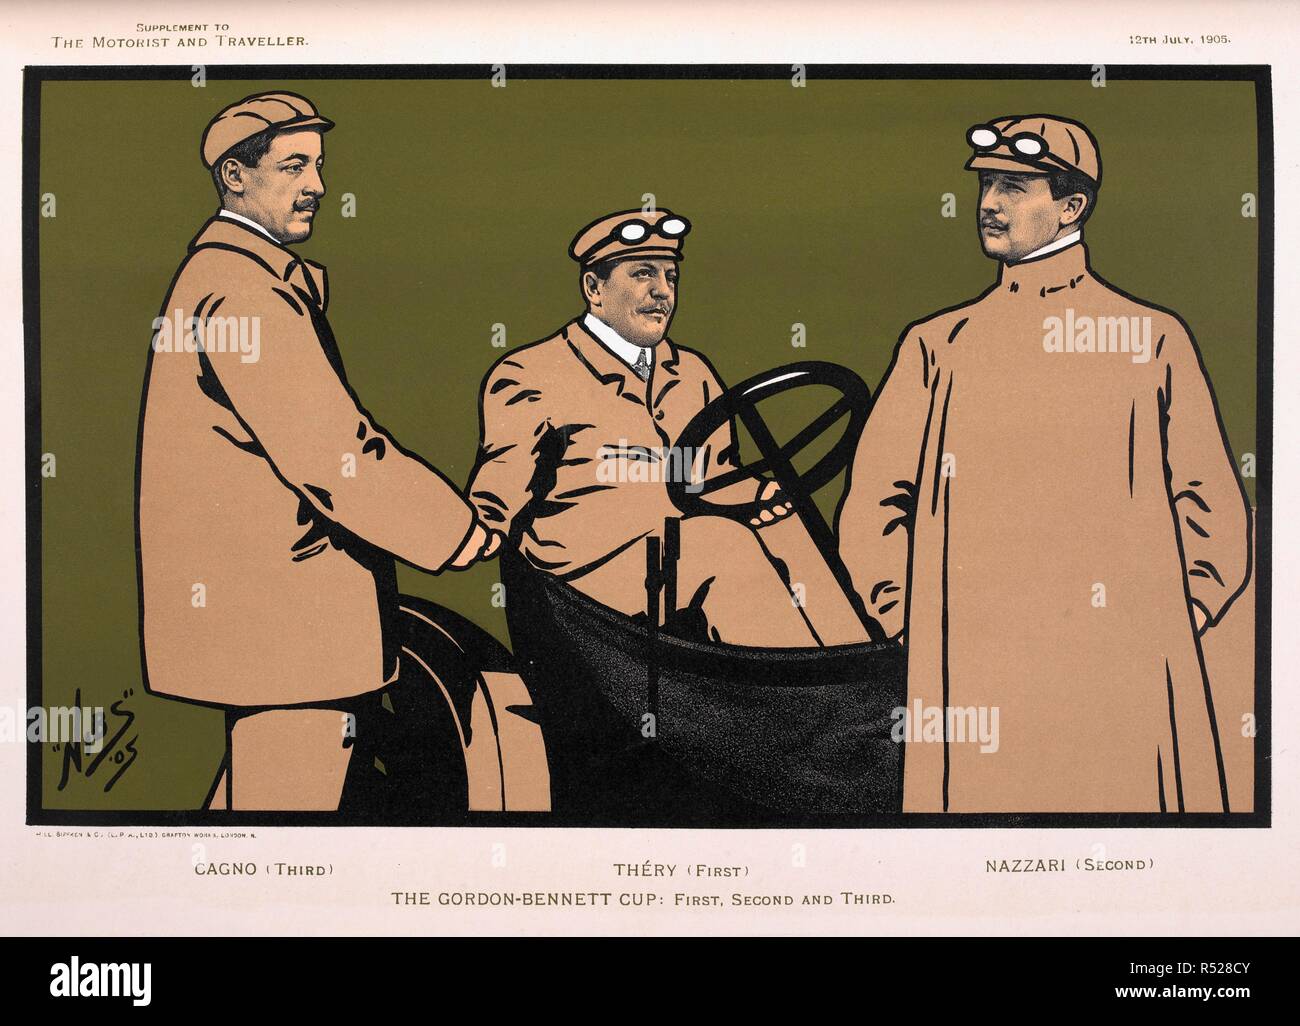 The Gordon-Bennett Cup: First, second and third. LÃ©on ThÃ©ry (first); Felice Nazzari (second); and, Alessandro Cagno (third).  The 1905 Gordon Bennett Cup, formally titled the VI Coupe Internationale, was a motor race held on 5 July 1905, on the Auvergne Circuit in France. The Motorist and Traveller. London 1905. Source: The Motorist and Traveller. 12 July 1905. Opposite page 892. Author: Niblett ('Nibs'), Frederick Drummond. Stock Photo